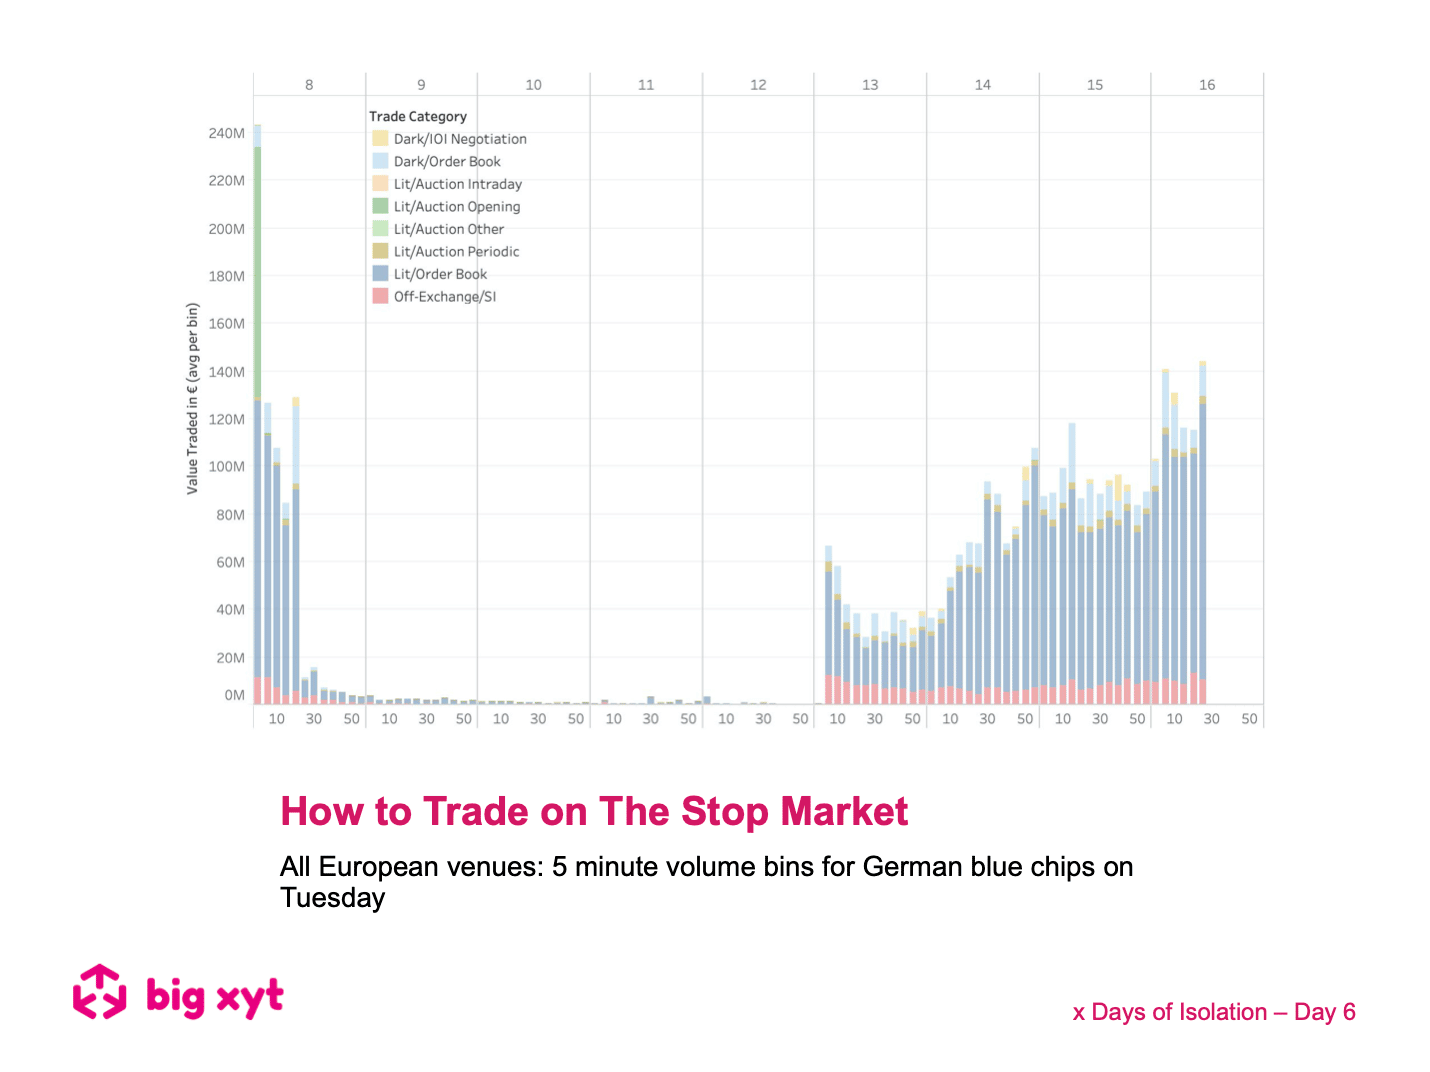 x Days of Isolation – Day 06: How to Trade on The Stop Market